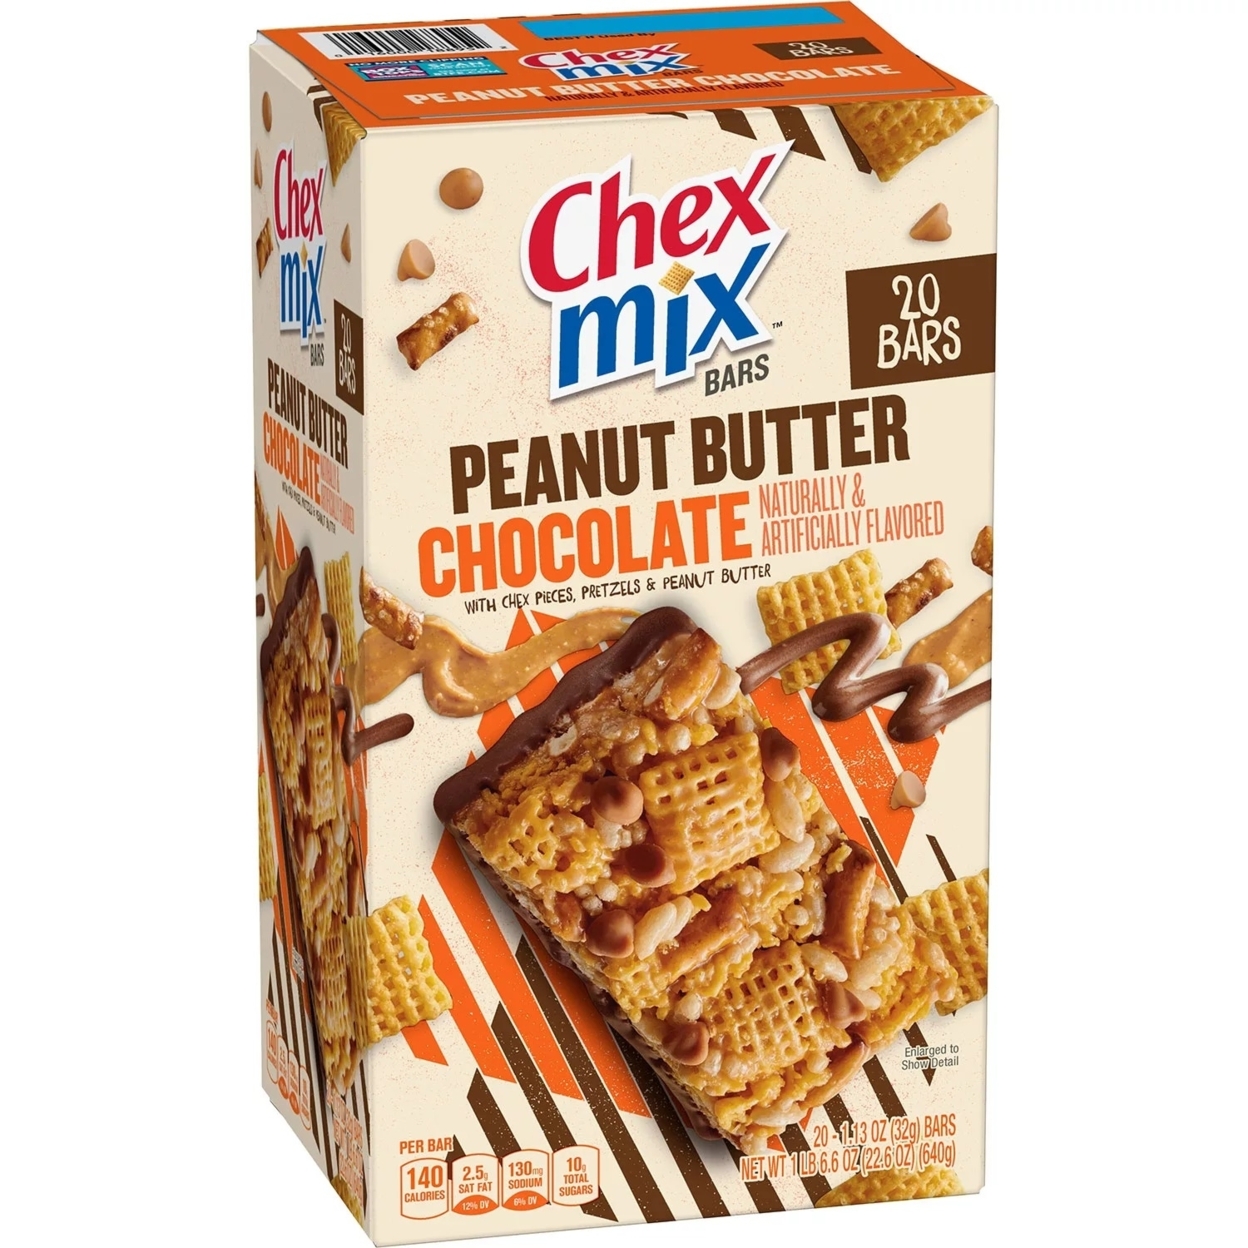 Chex Mix Peanut Butter Chocolate Treat Bars, 1.3 Ounce (20 Count)